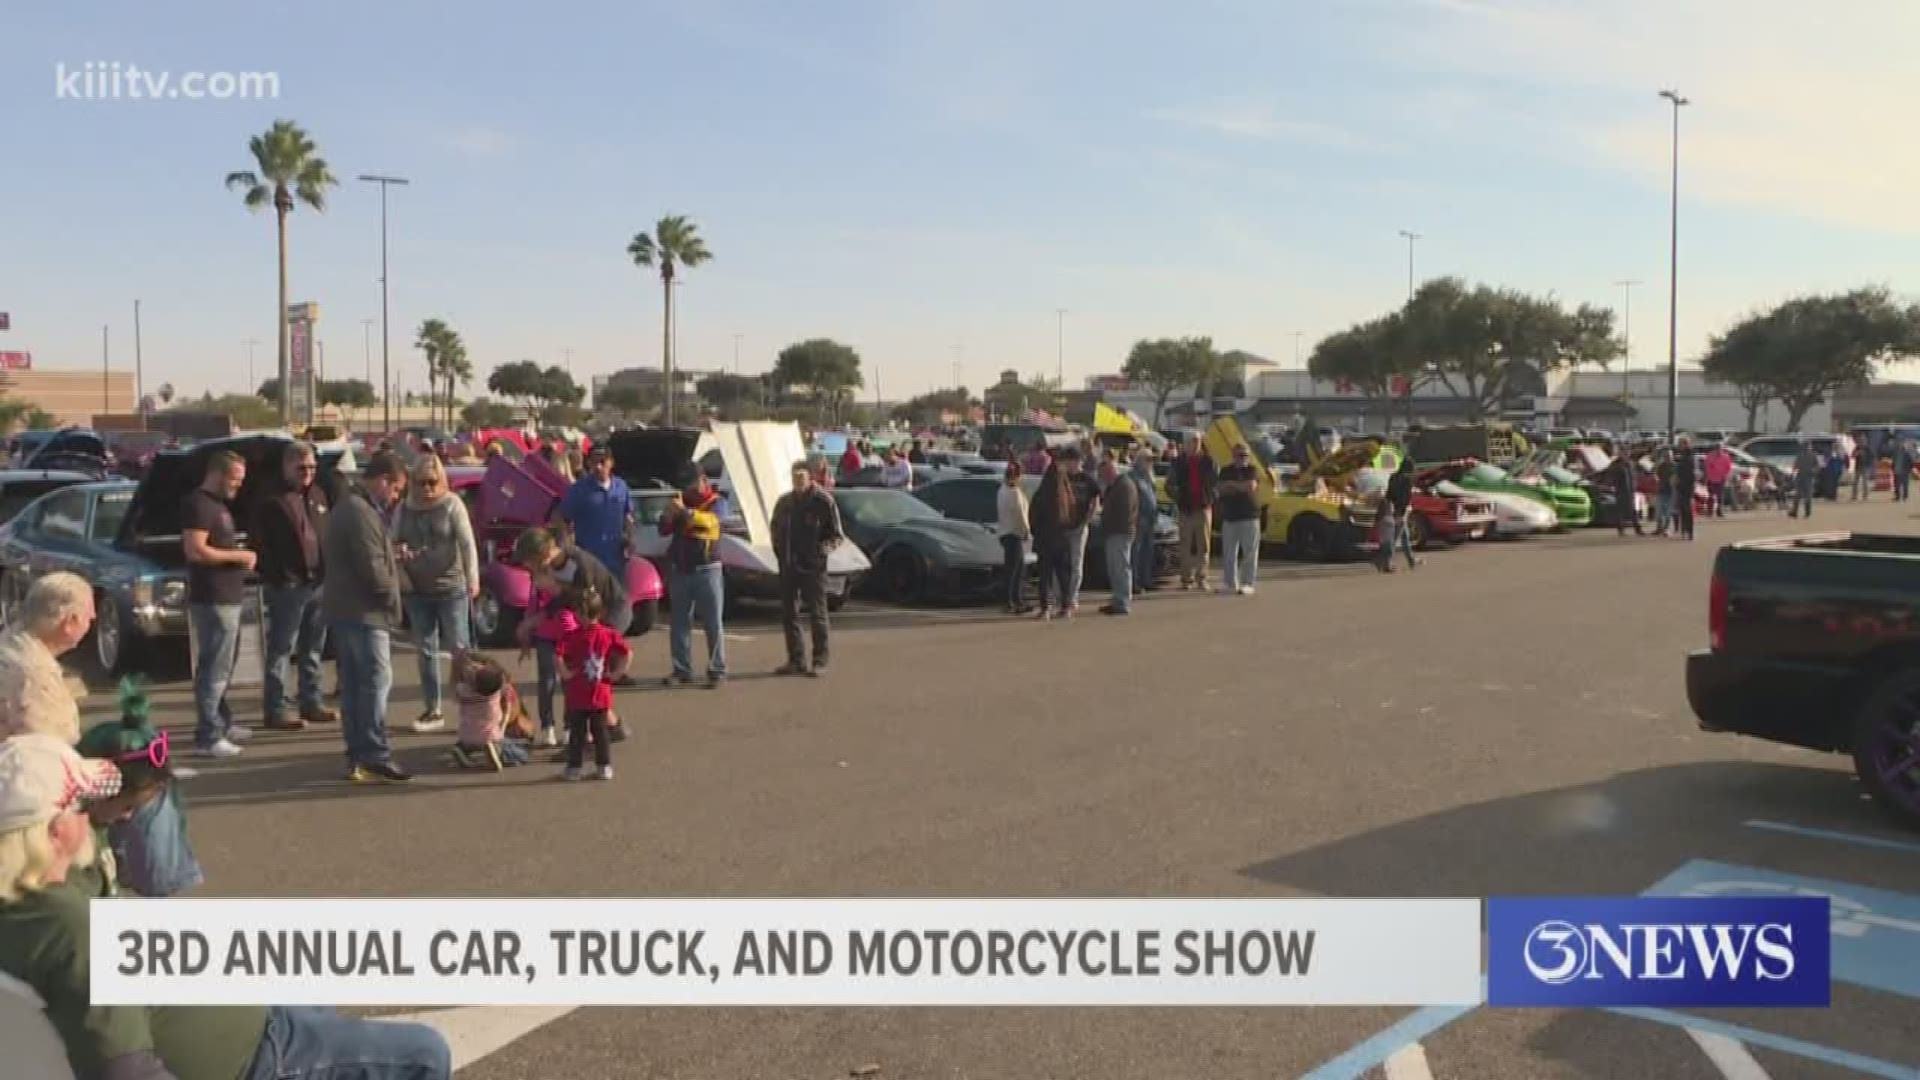 The show was hosted by the Corpus Christi Corvette Club and the purpose of the event was to raise money for different veterans charities around the Coastal Bend.